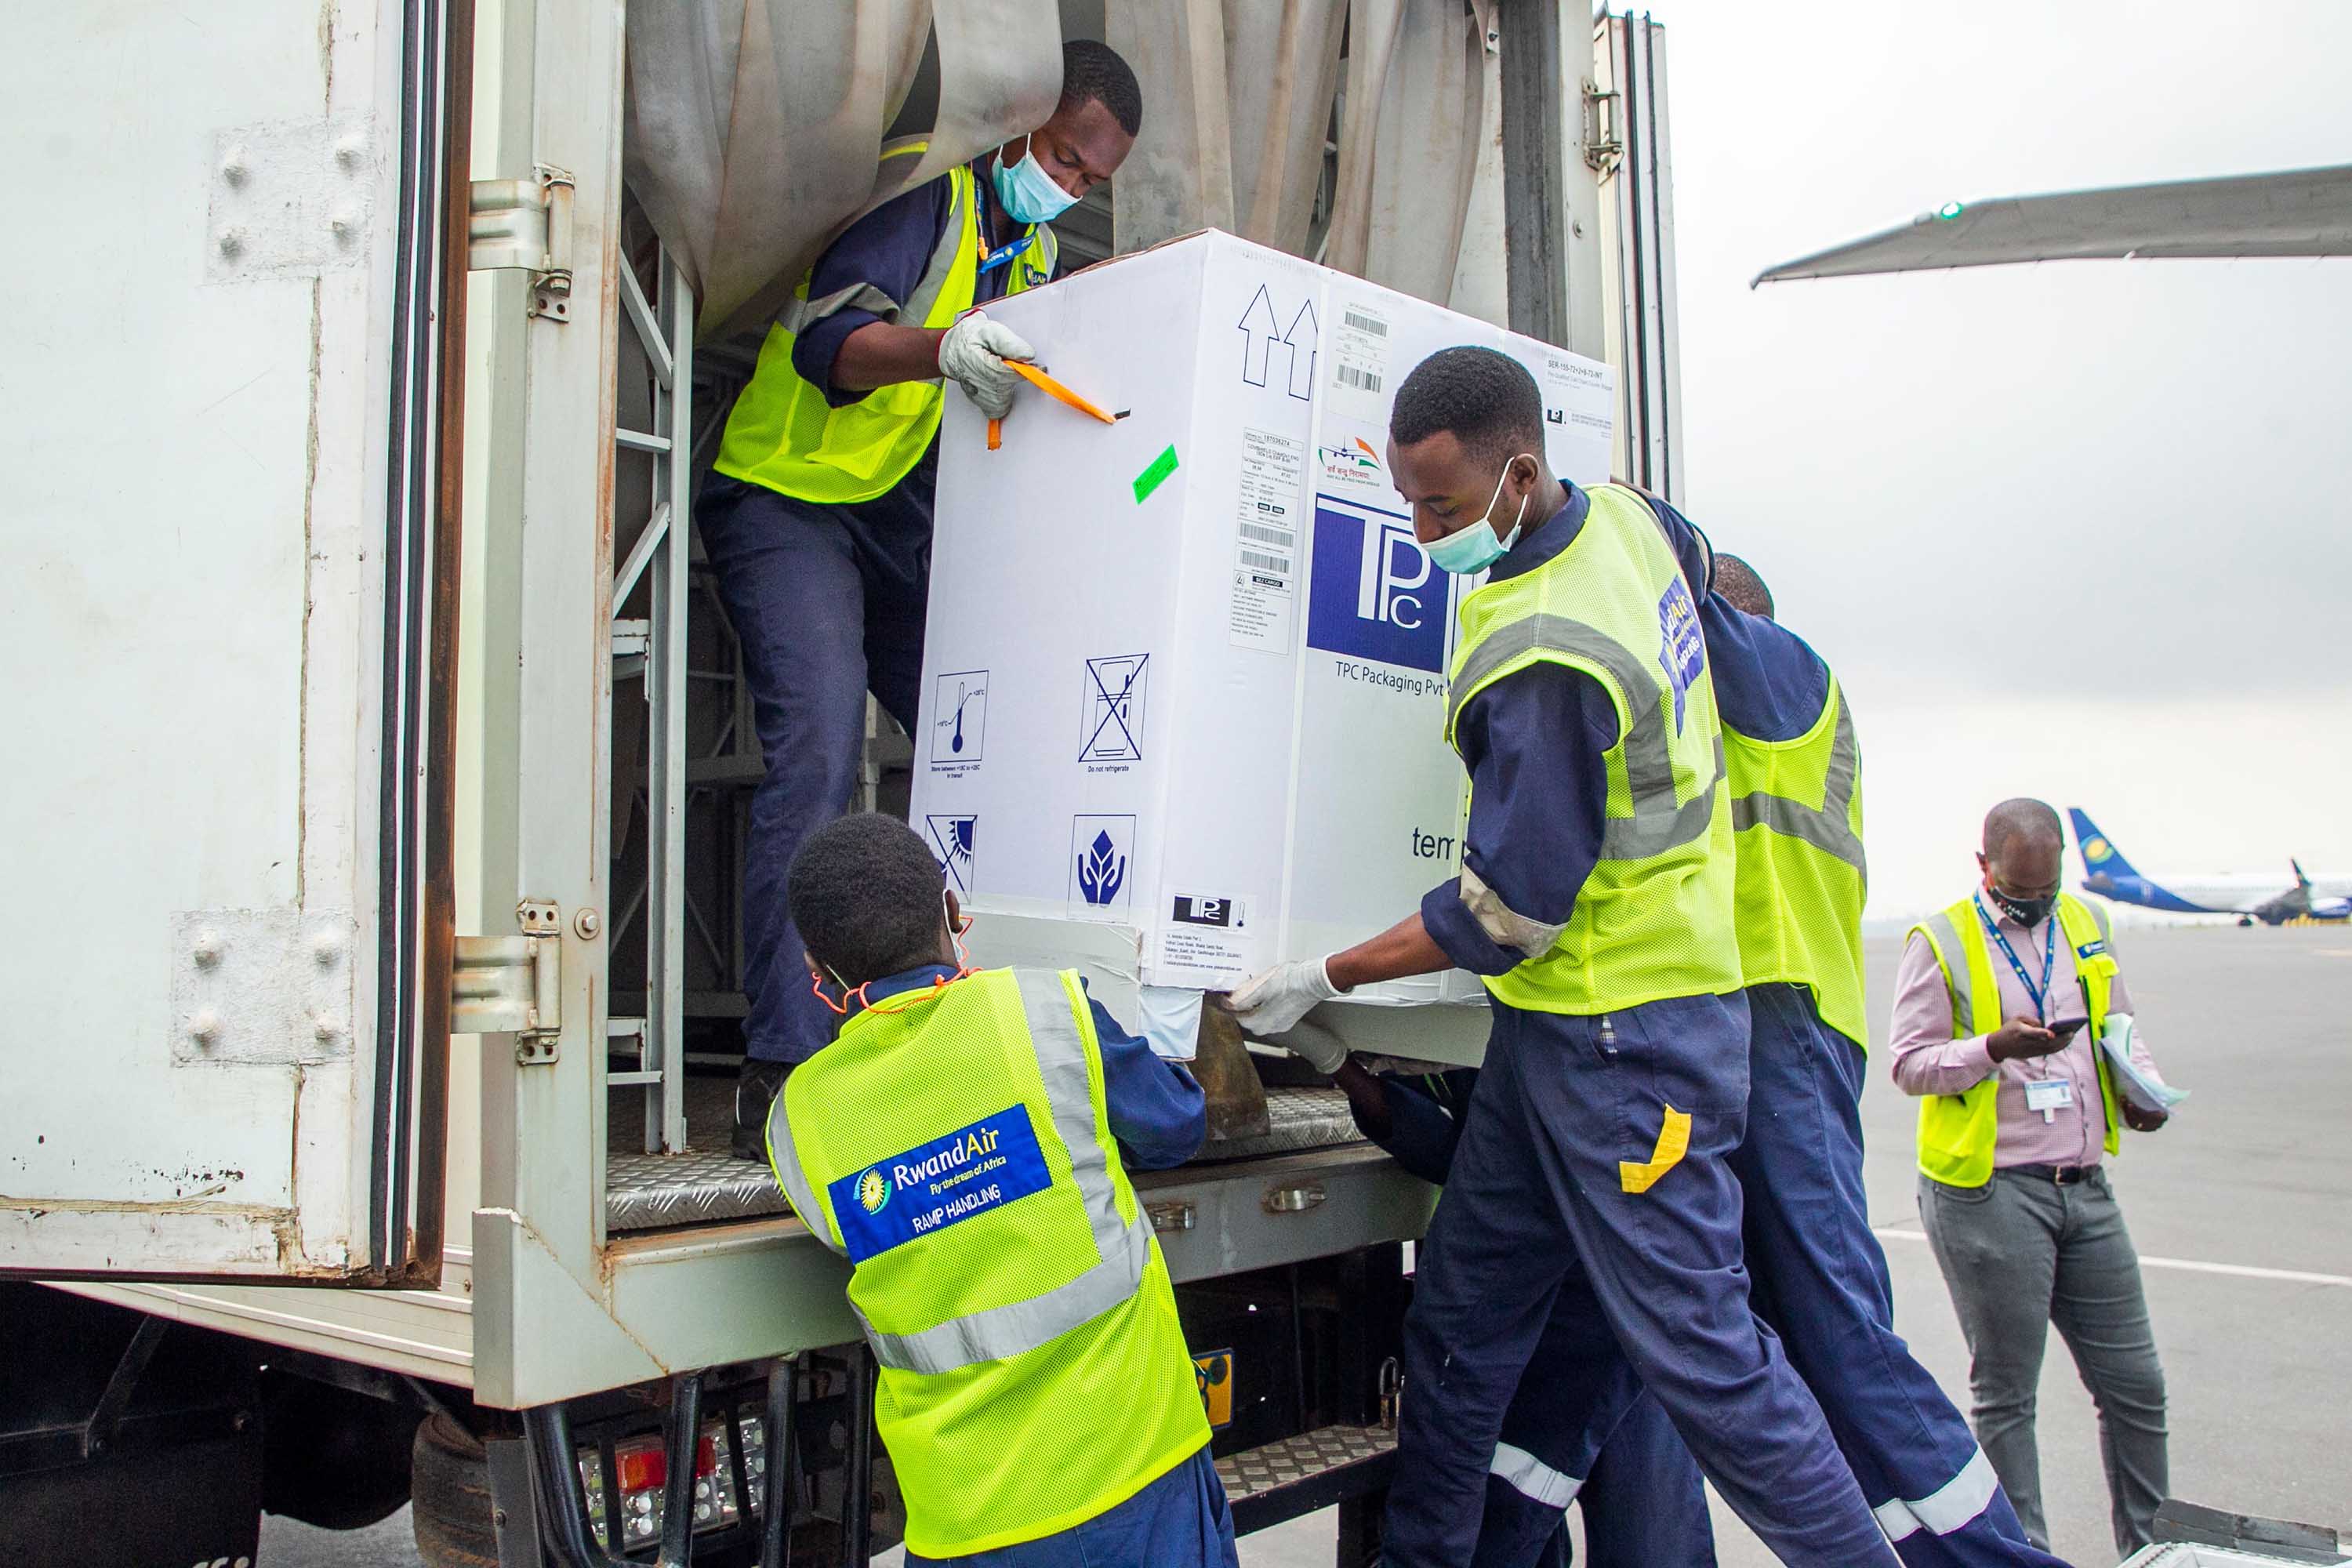 Staff transport a load of Oxford/AstraZeneca vaccines into a refrigerated vehicle during the arrival of the first batch of doses at the Kigali International Airport in Kigali, Rwanda, on March 3. 